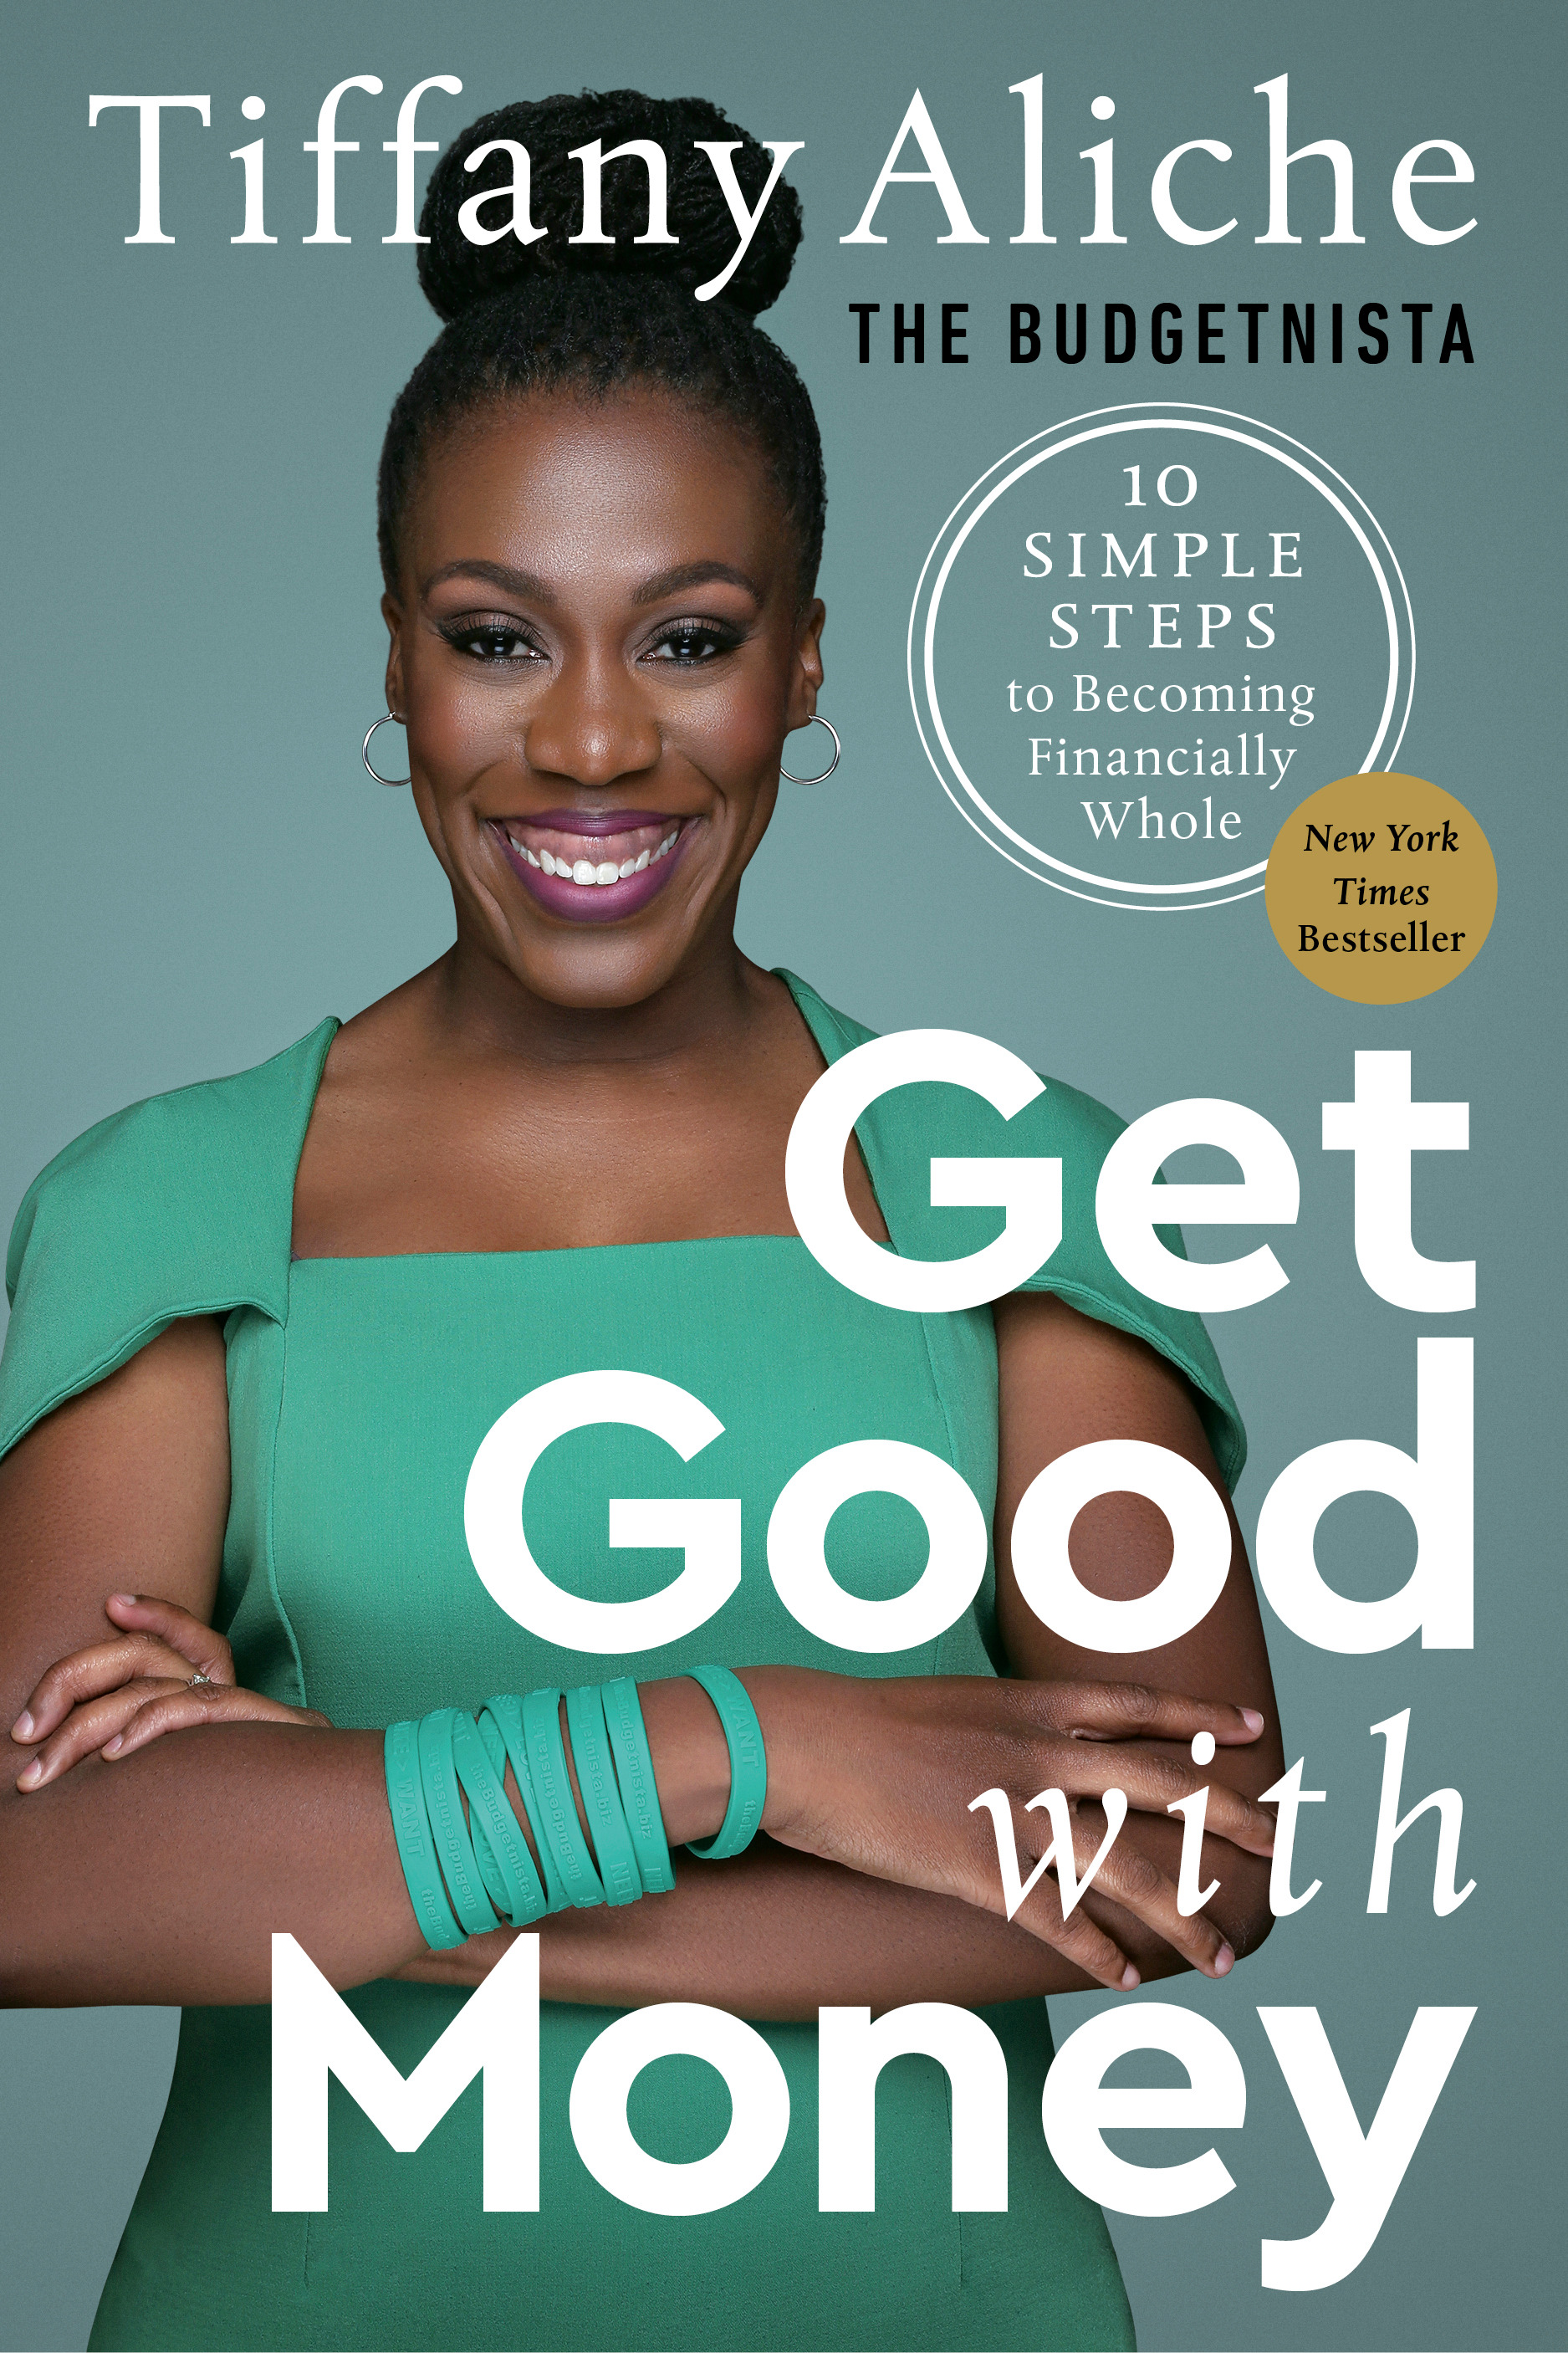 Get Good with Money : Ten Simple Steps to Becoming Financially Whole | Tiffany the Budgetnista Aliche